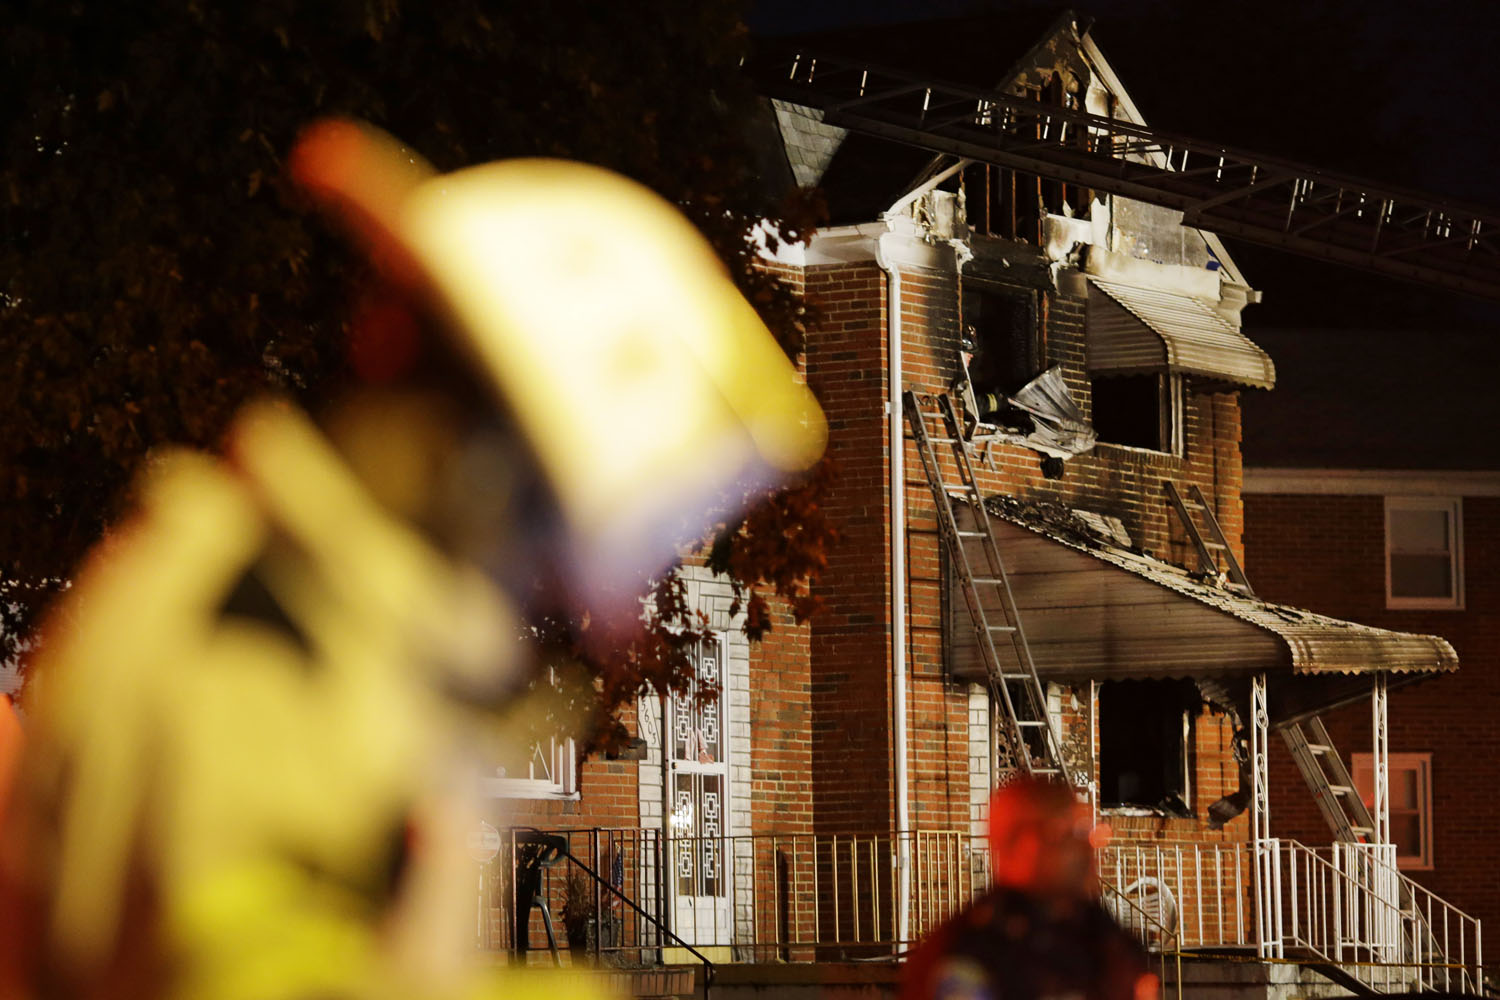 Oct. 11, 2012. Officials stand in front of a fire-damaged house in Baltimore, where an early morning fire claimed the lives of an adult and four children.